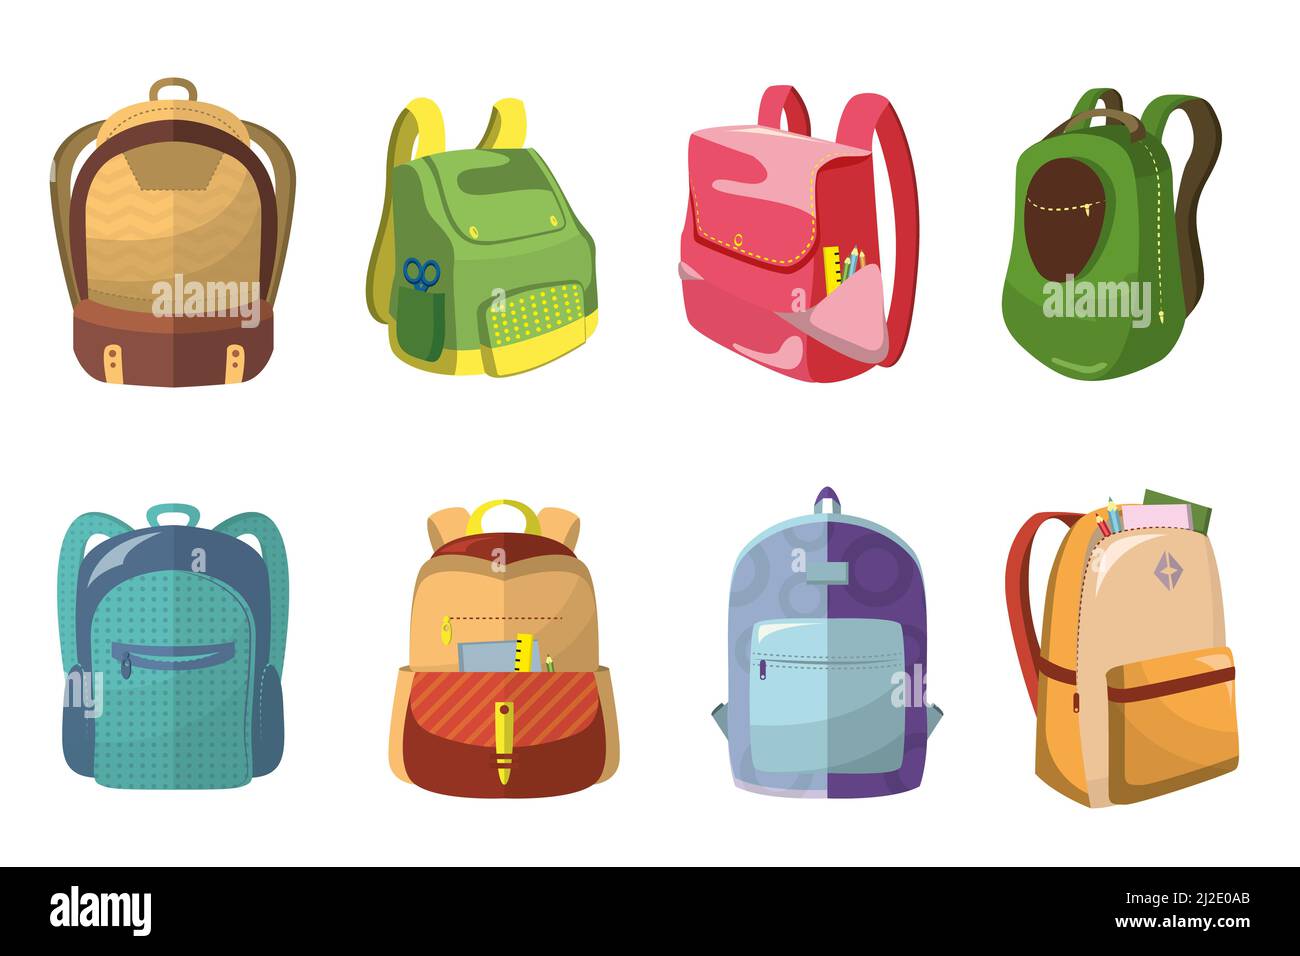 Colorful school bags set. Kids backpacks with school supplies in open pockets, schoolbags children. Vector illustration for back to school, education, Stock Vector